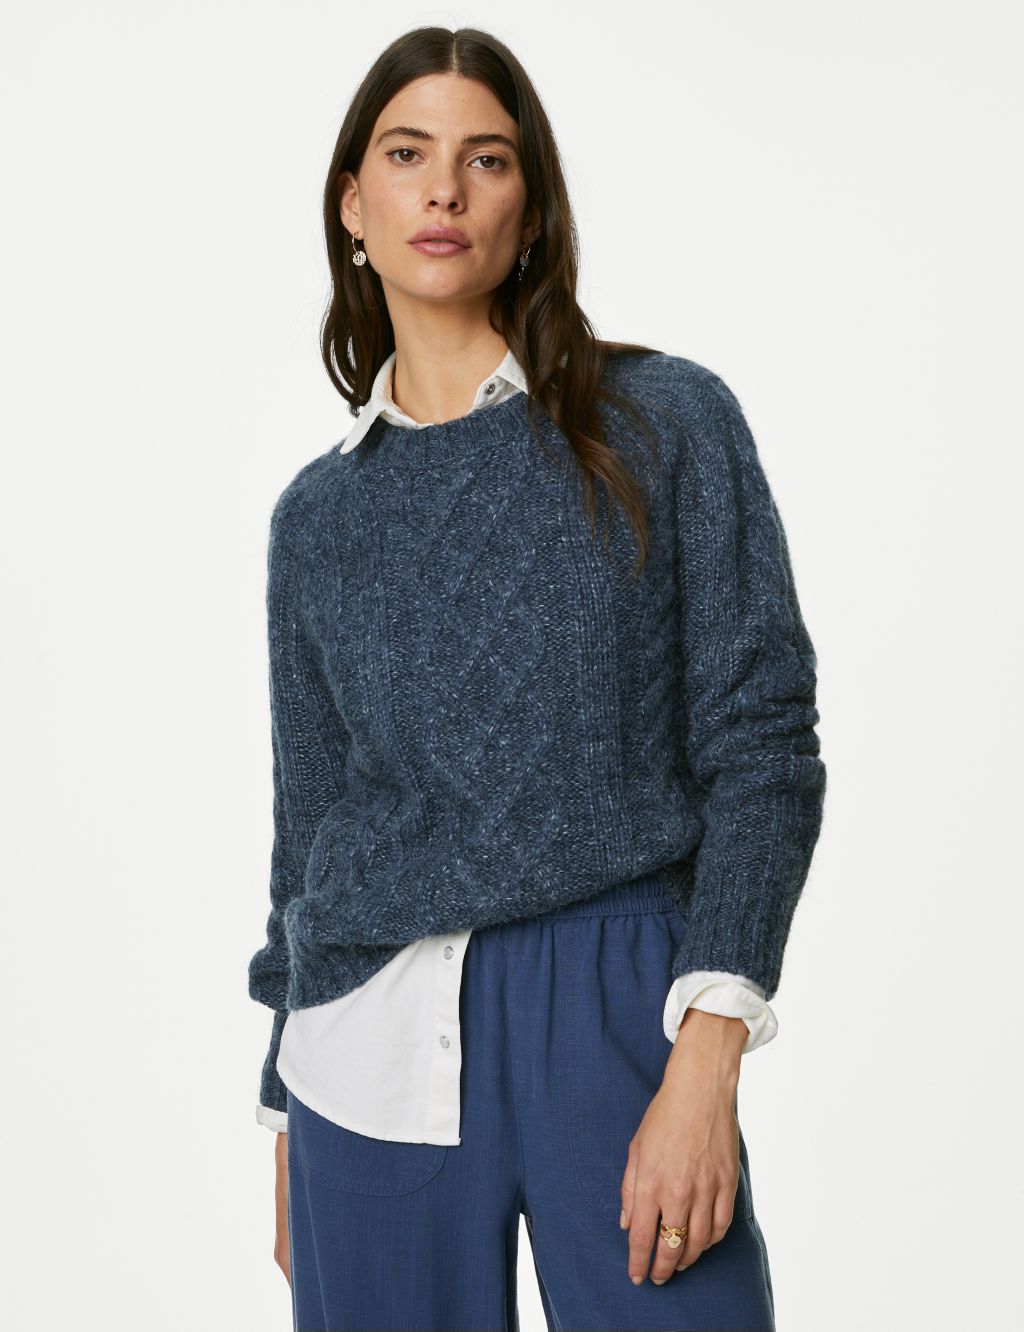 Cable Knit Jumper with Wool image 2